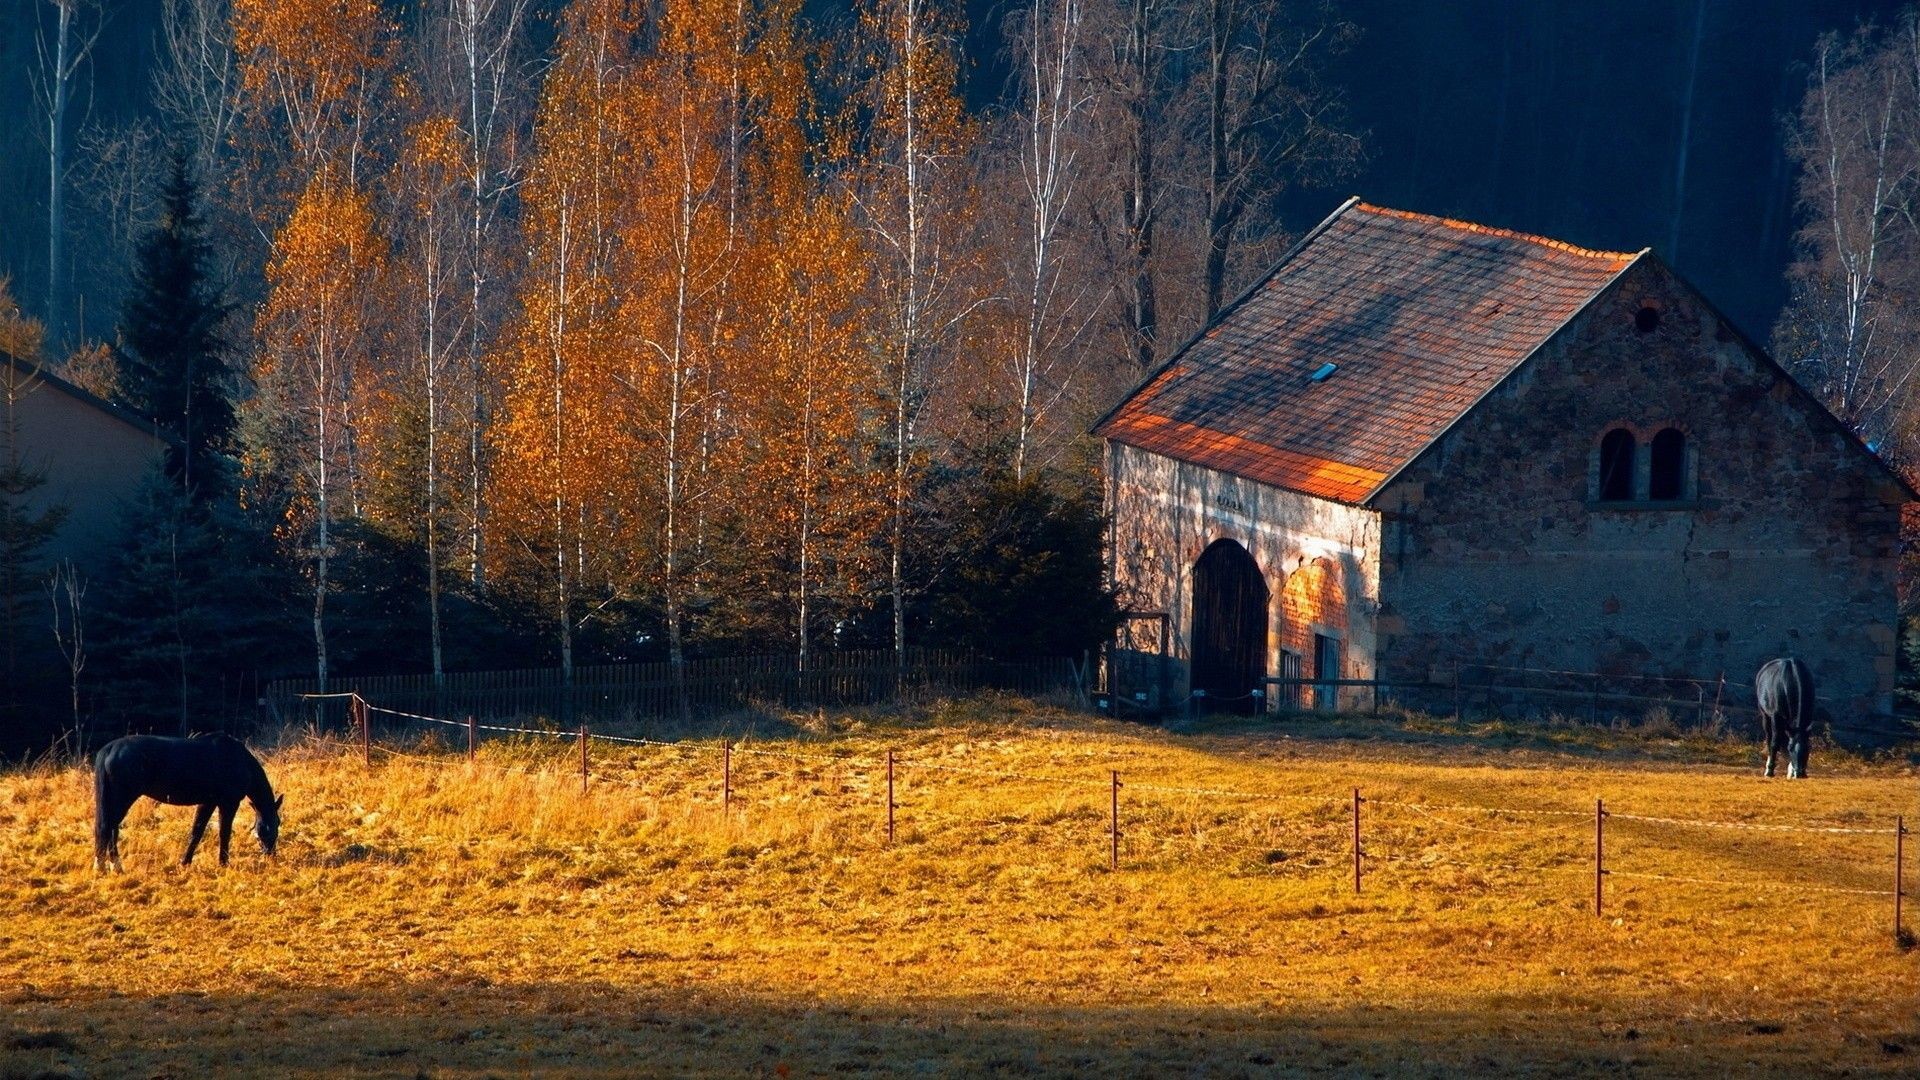 1920x1080 3840x2160 Old Barn Wallpapers (39+ images)">